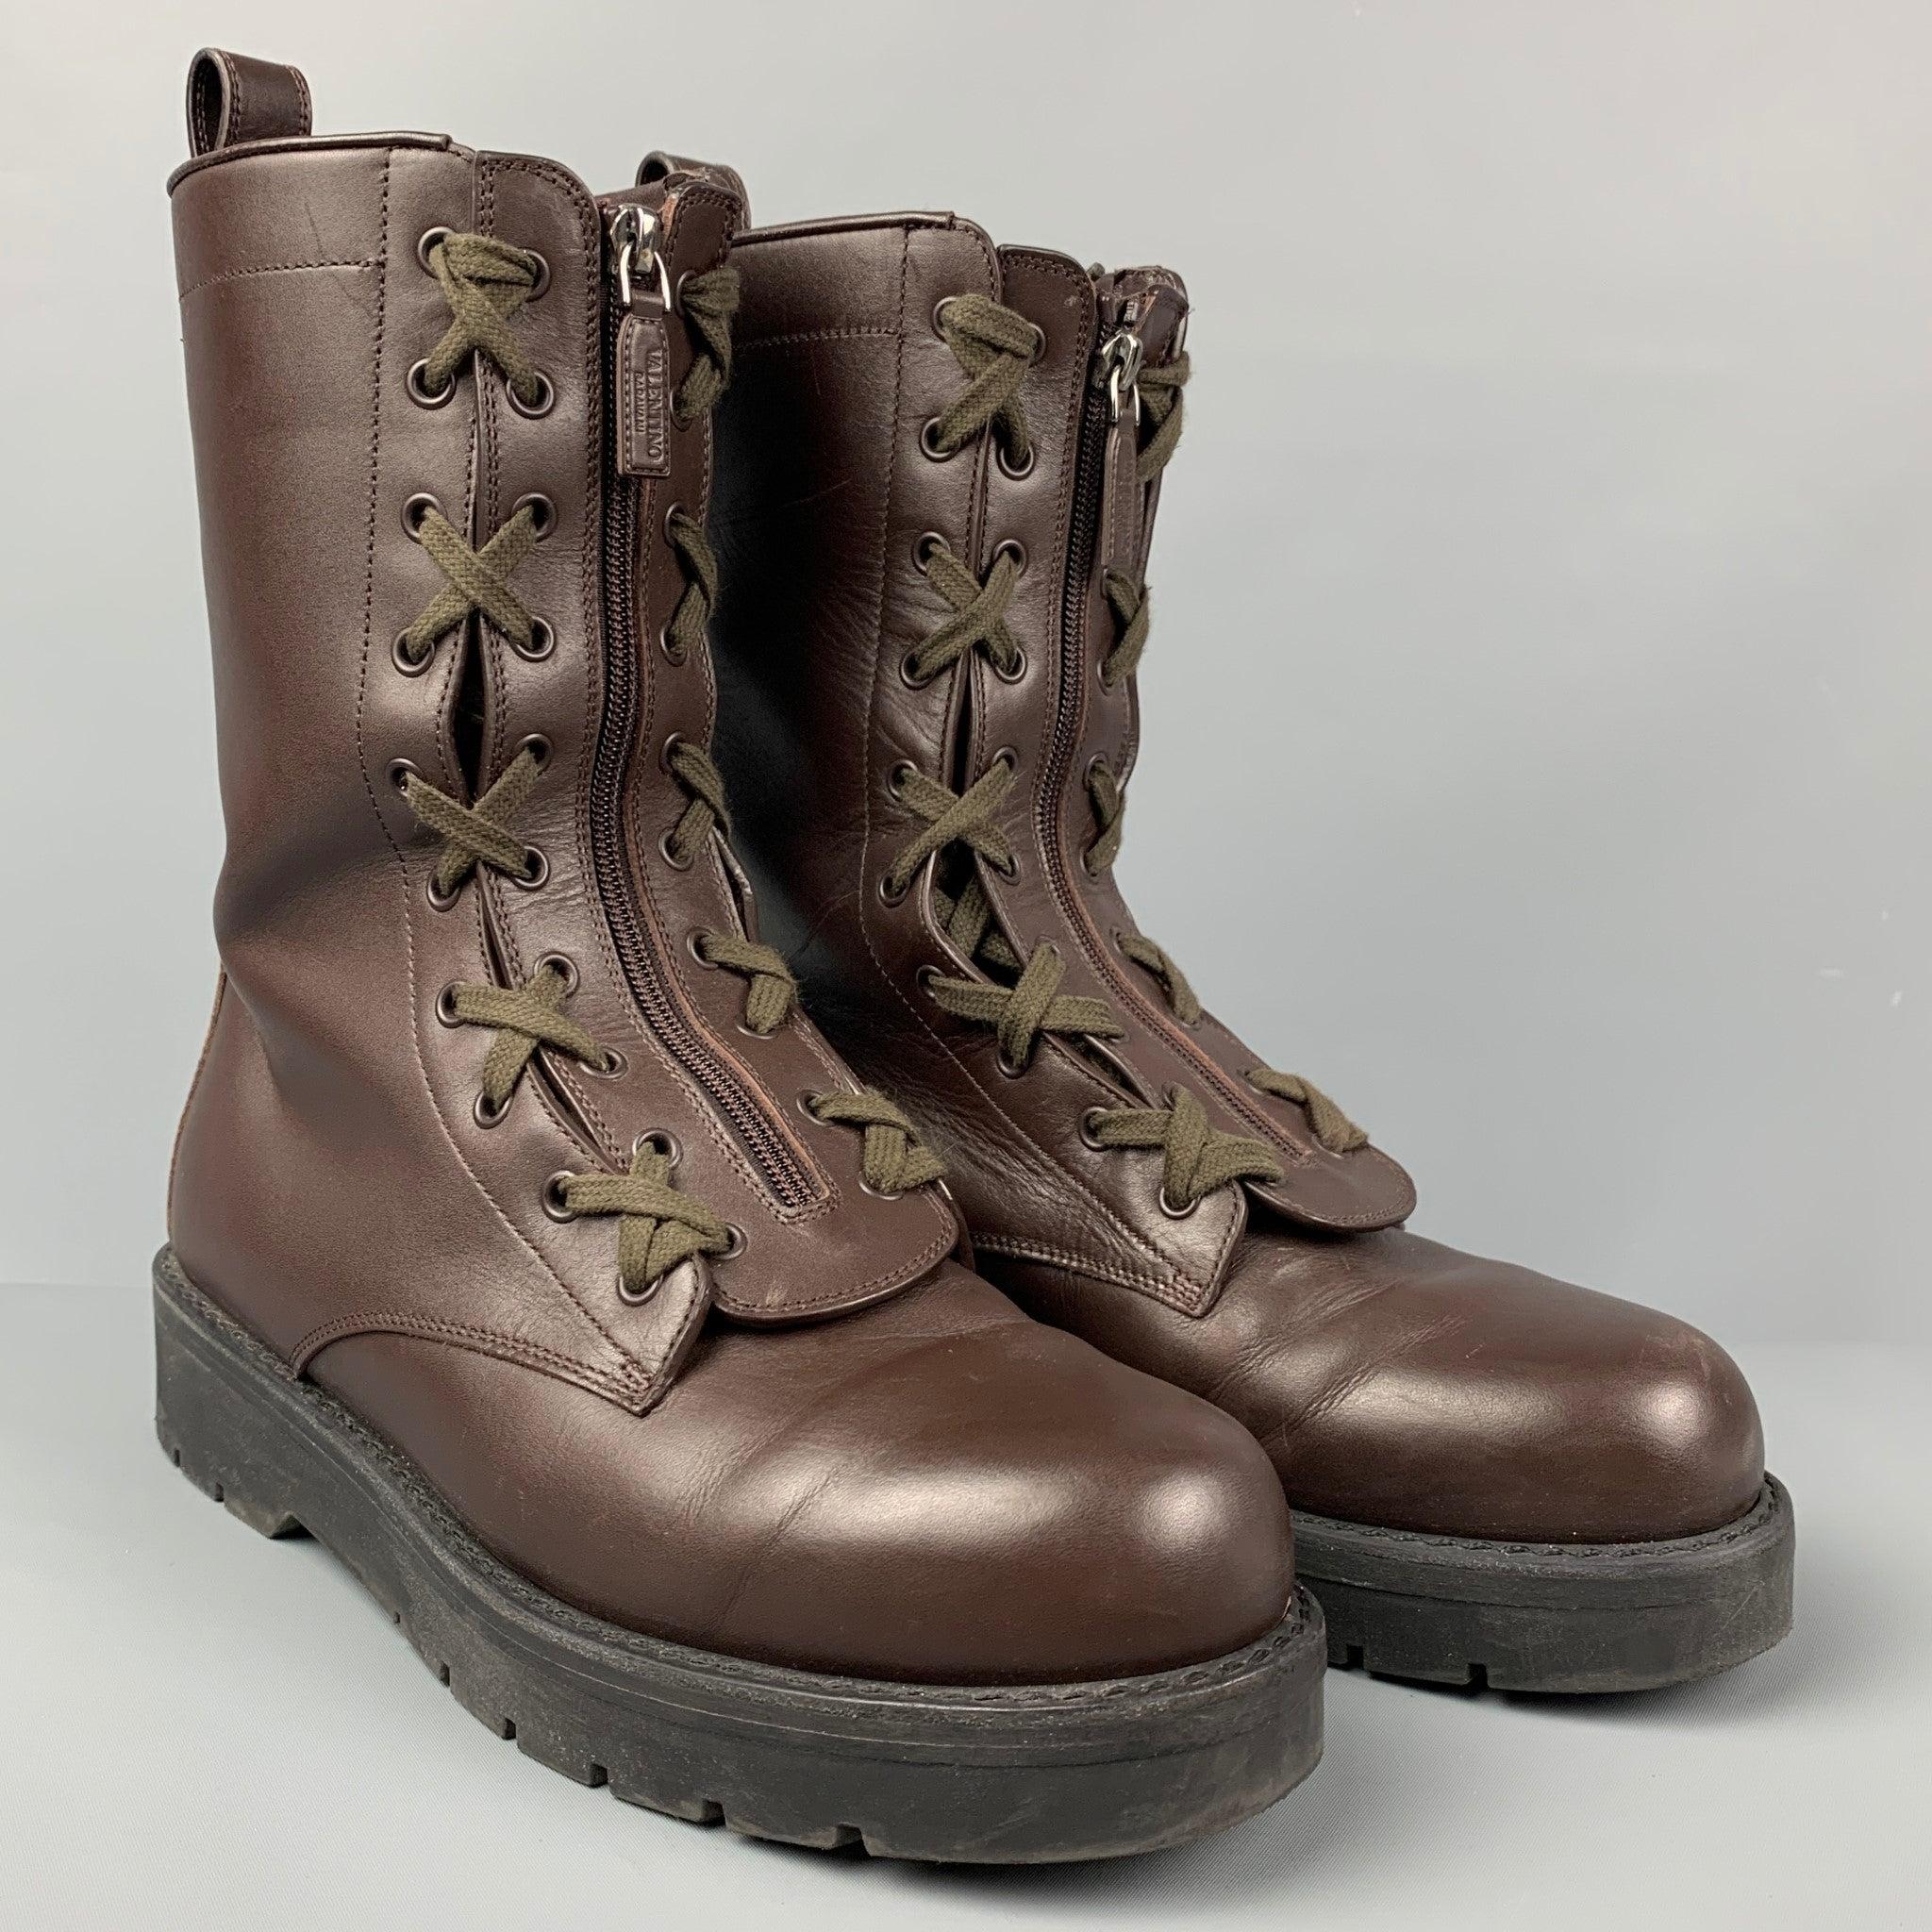 VALENTINO boots comes in a brown leather featuring a combat style, pull tan with stud embellishment, rubber sole with stud motif, and a front fastening with laces and zipper closure. Made in Italy.
Very Good
Pre-Owned Condition. 

Marked:   BUXF78 2